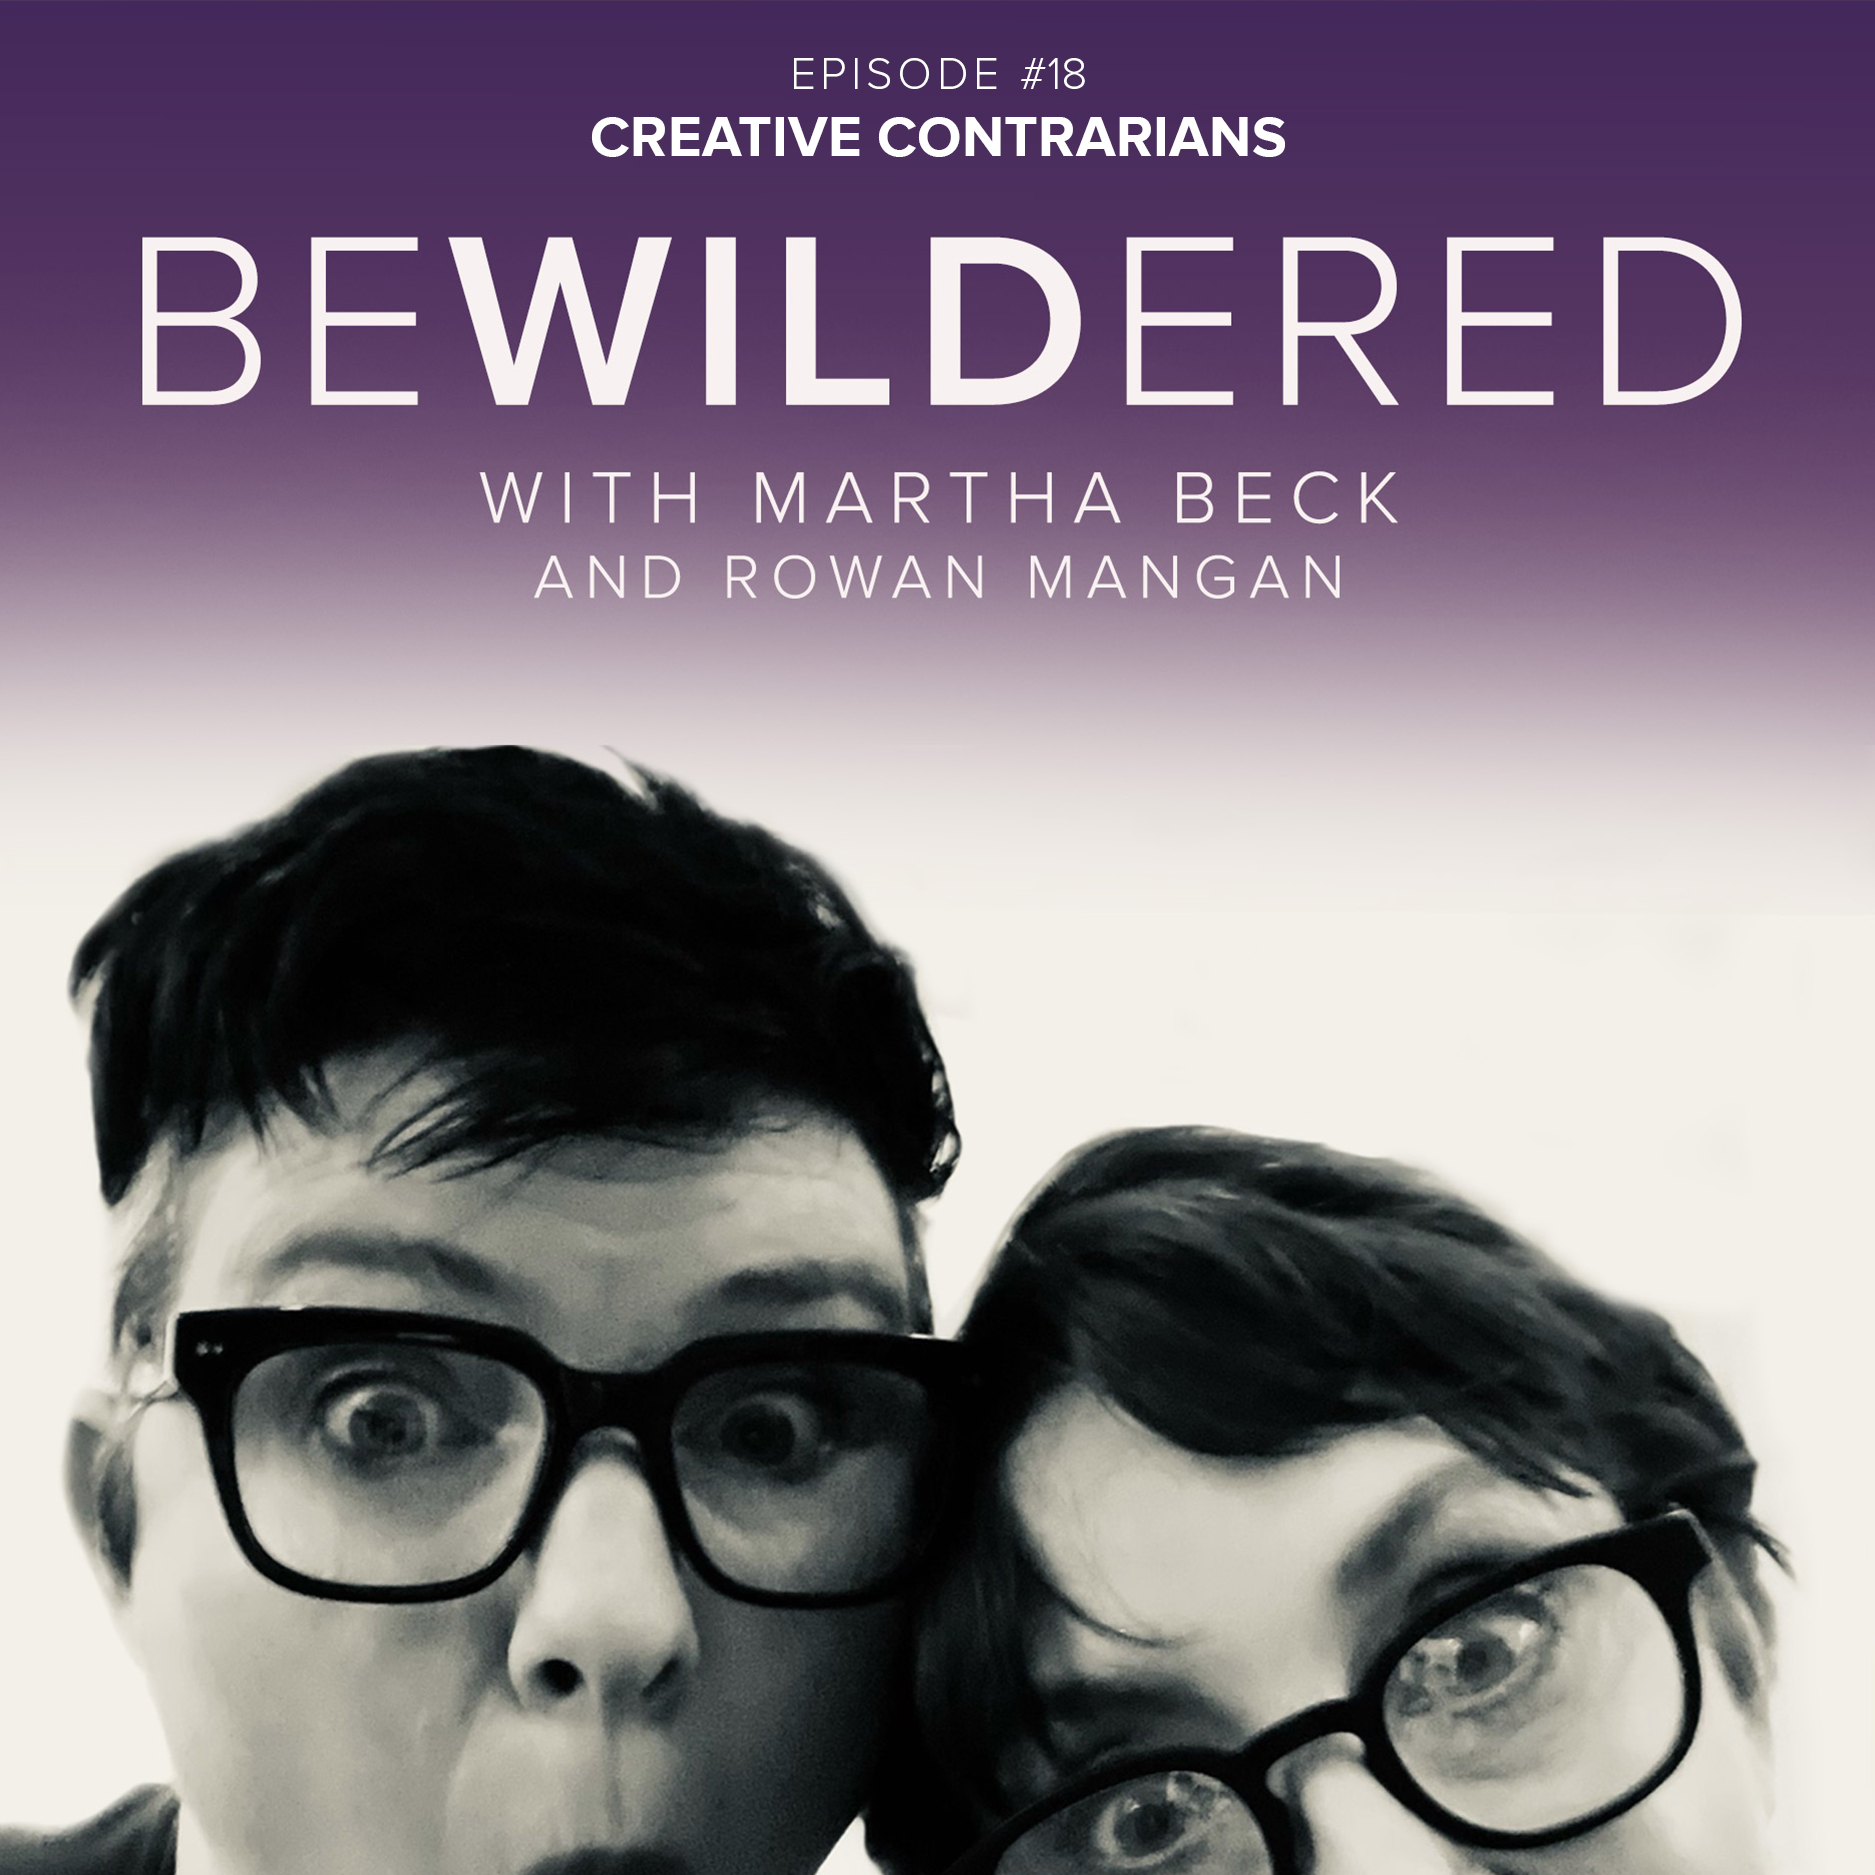 Image for Episode #18 Creative Contrarians for the Bewildered Podcast with Martha Beck and Rowan Mangan